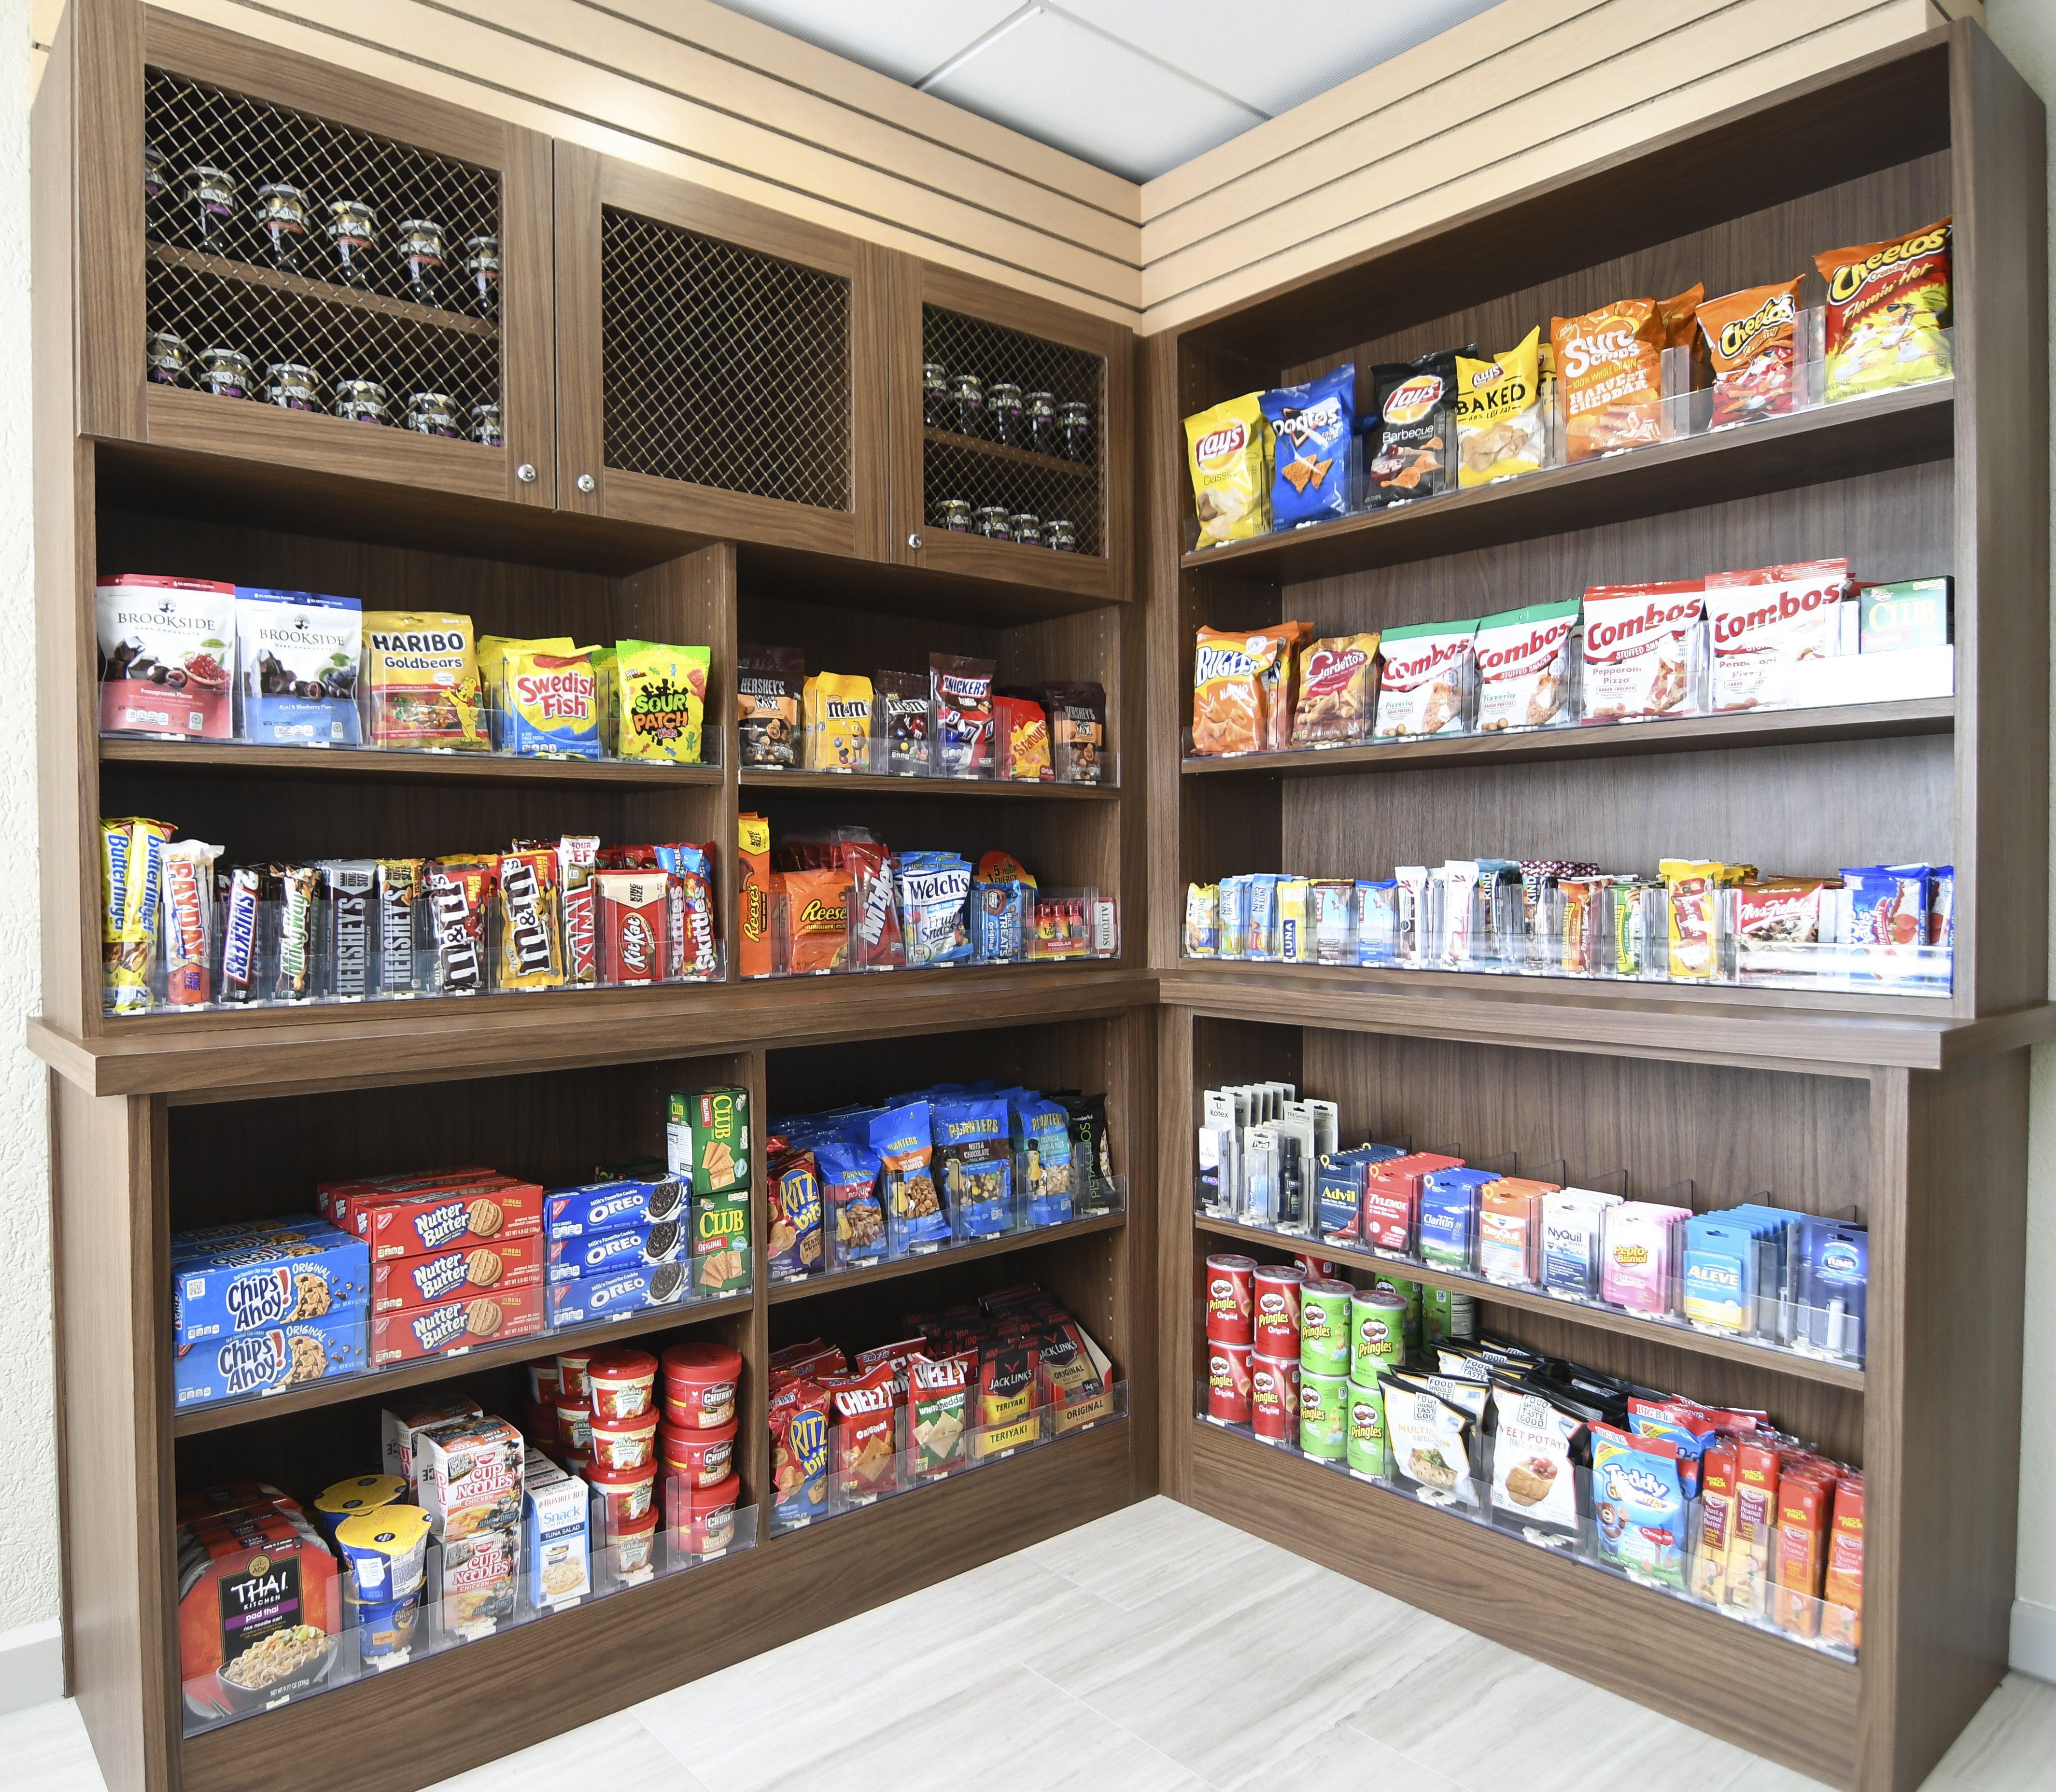 Market Pantry when your hungry